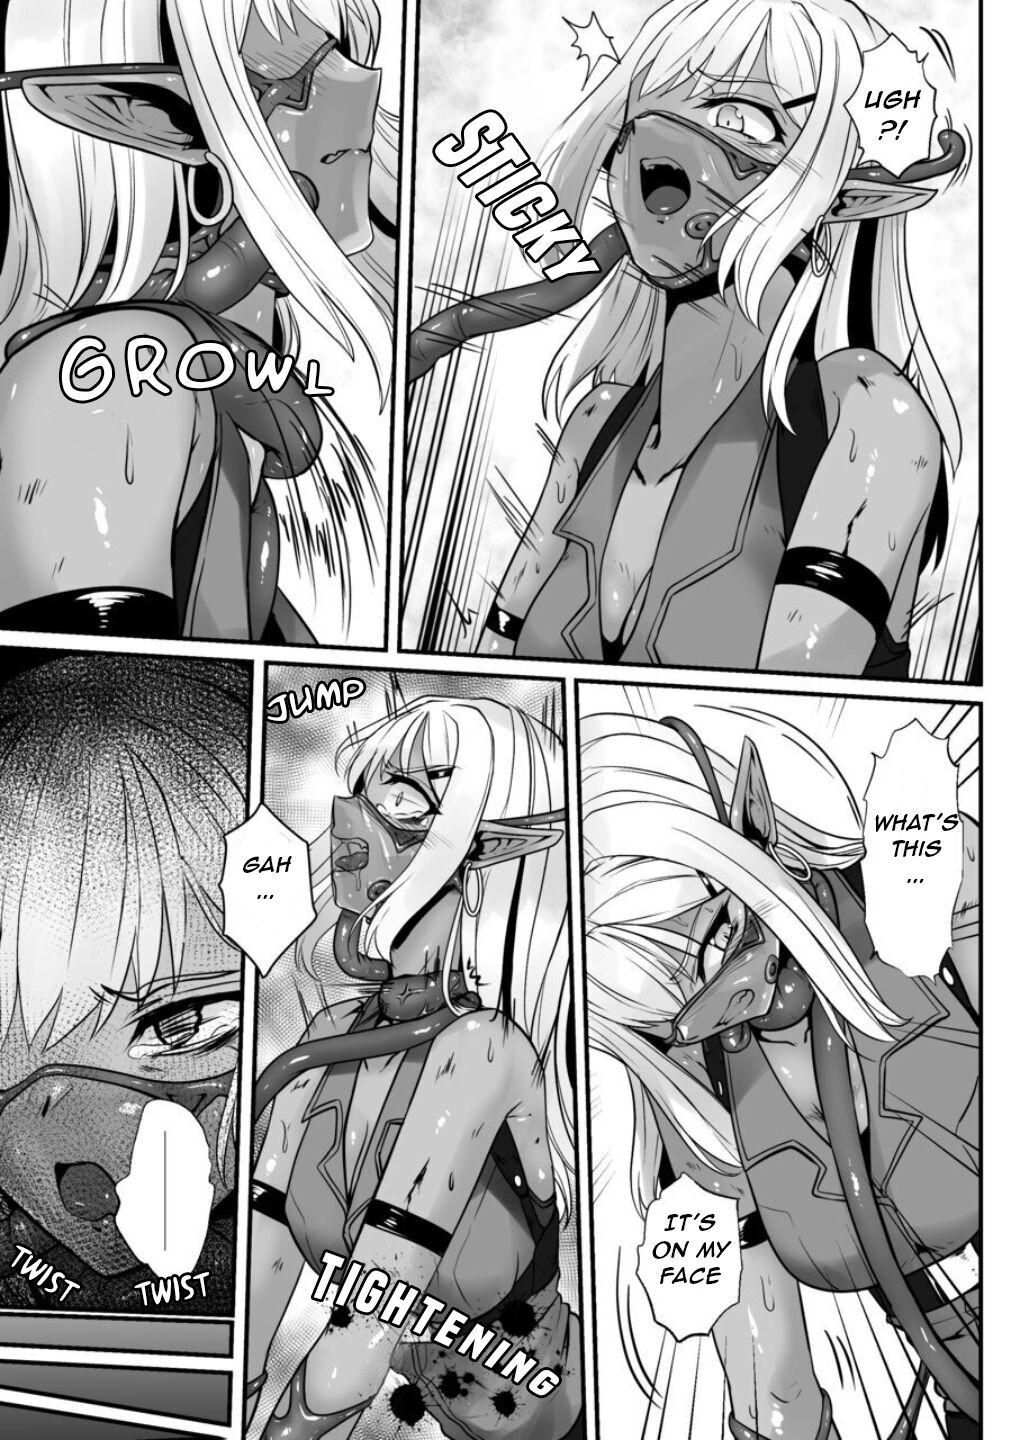 Blond Wereelf - Reincarnated in Living clothes... 3 - Original Whatsapp - Page 6